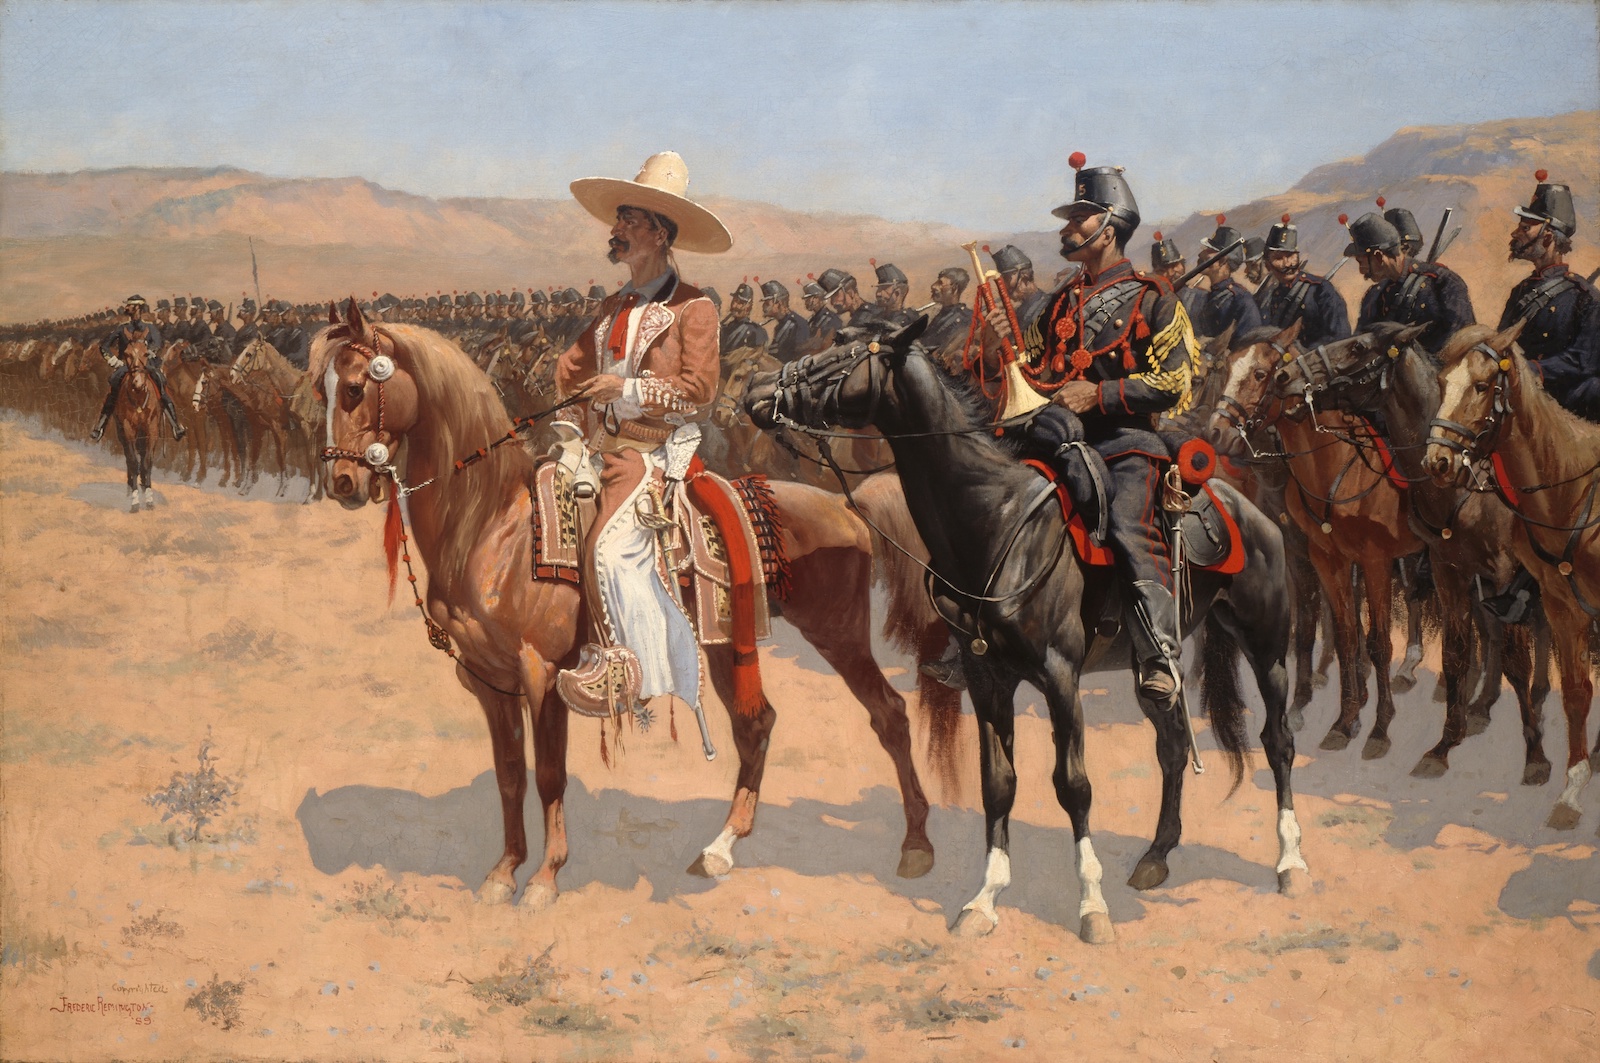 ‘The Mexican Major’ by Frederic Remington, 1889, depicts Mexican cavalry in the period of Porfirio Diaz’s military rule. Art Institute of Chicago. Public Domain.